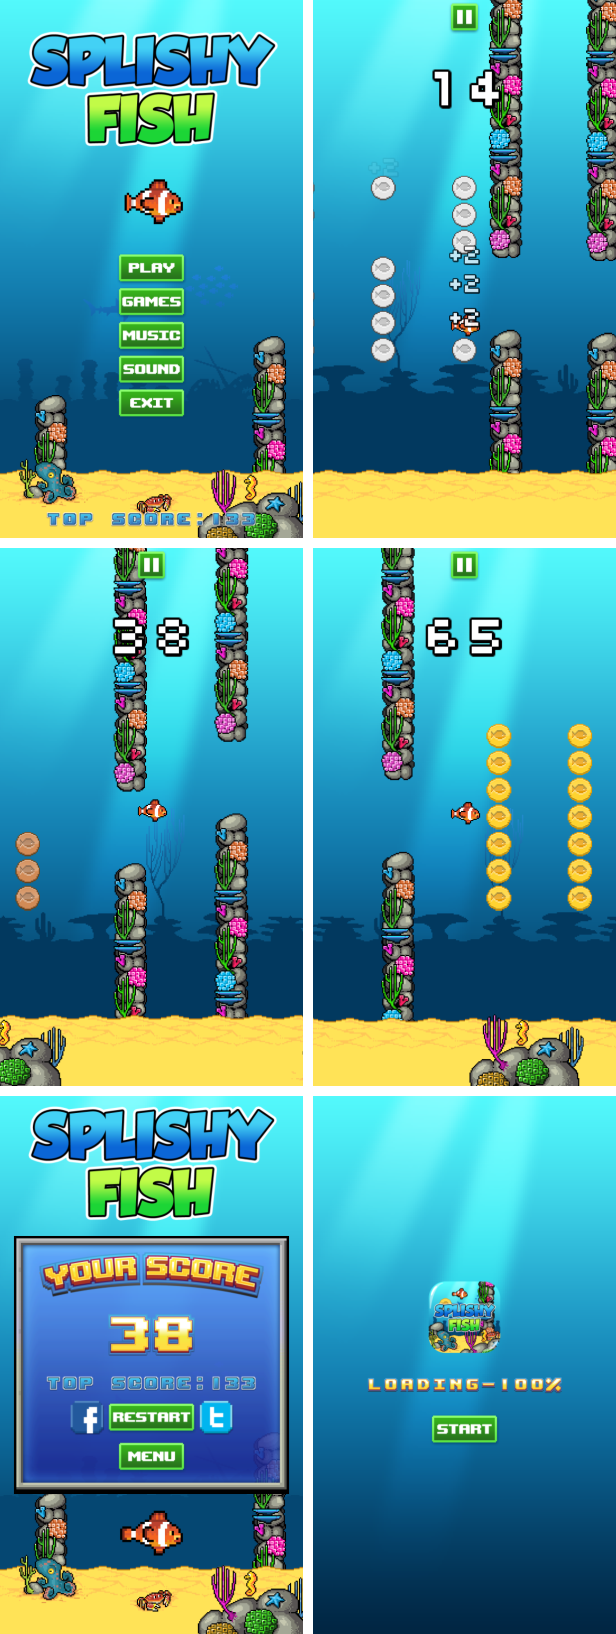 Splishy Fish - HTML5 Game + Mobile Version! (Construct 3 | Construct 2 | Capx) - 3